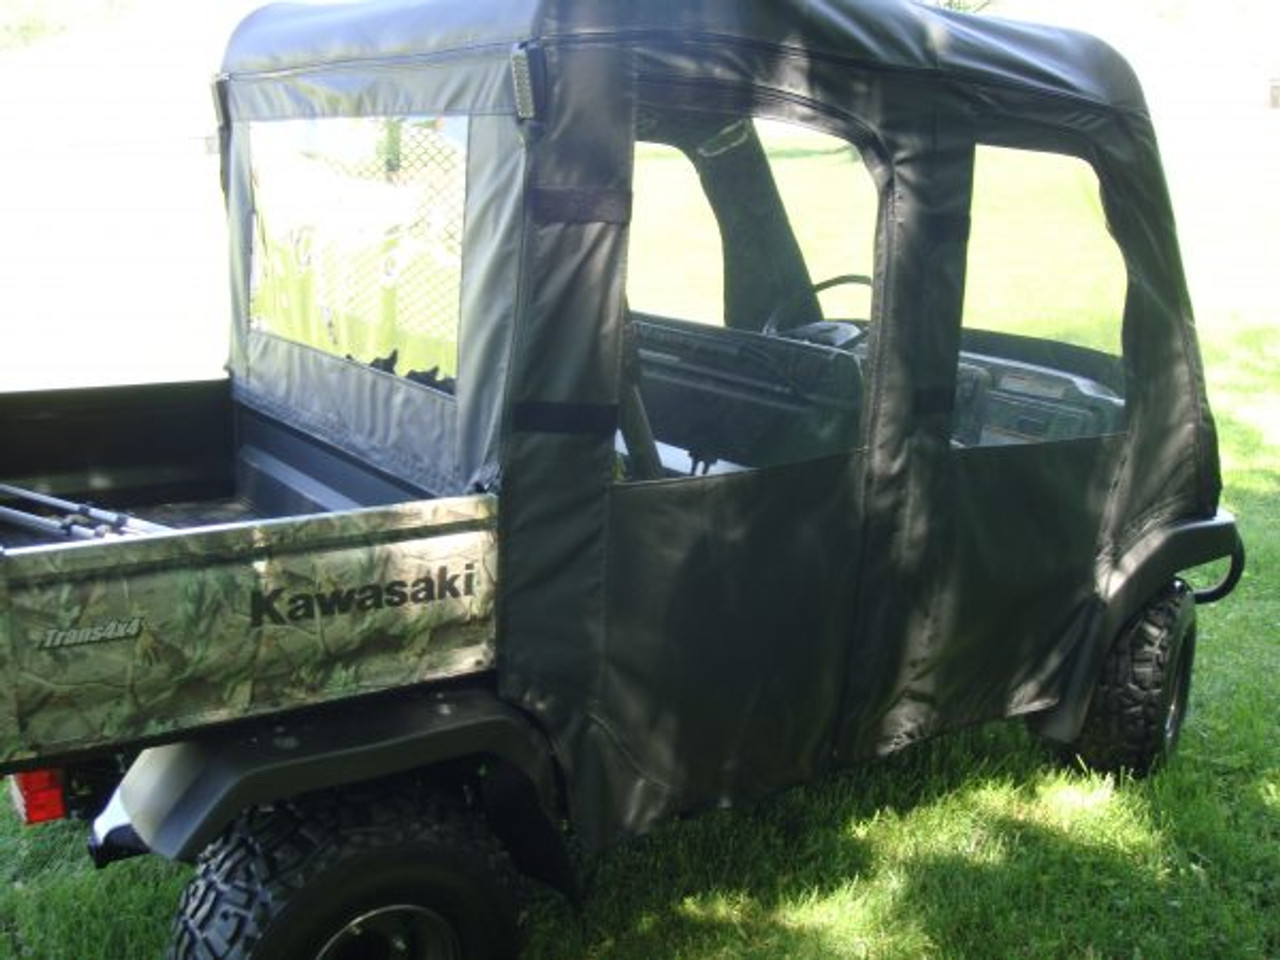 3 Star side x side Kawasaki Mule 3000/3010 Trans full cab enclosure with vinyl windshield rear and side angle view